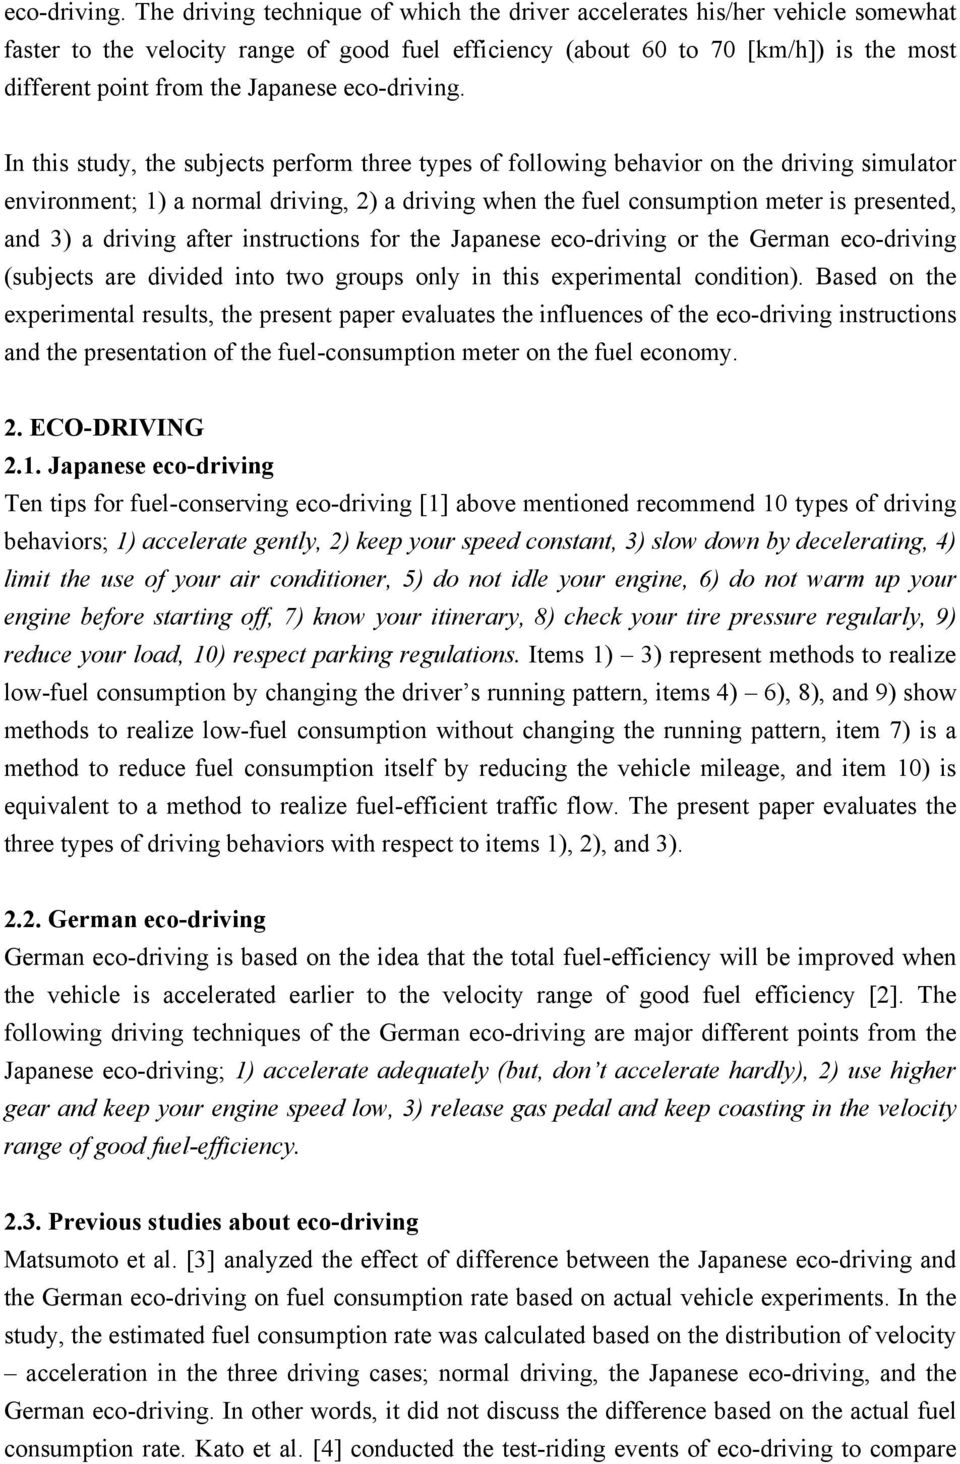 In this study, the subjects perform three types of following behavior on the driving simulator environment; 1) a normal driving, 2) a driving when the fuel consumption meter is presented, and 3) a